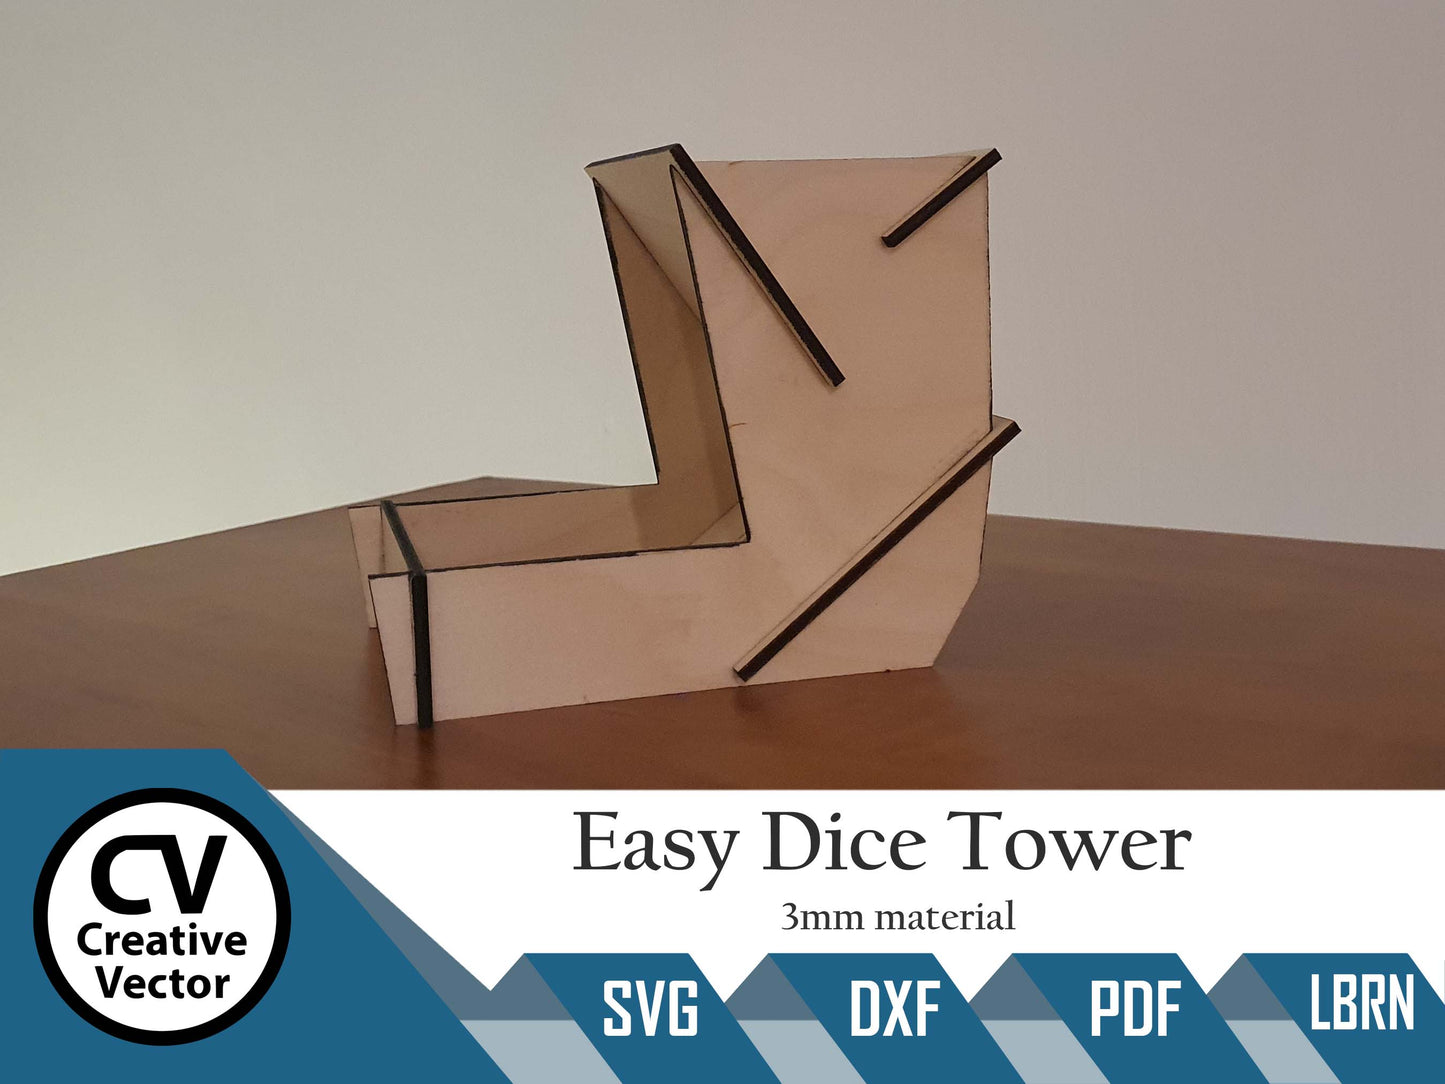 Easy Dice Tower